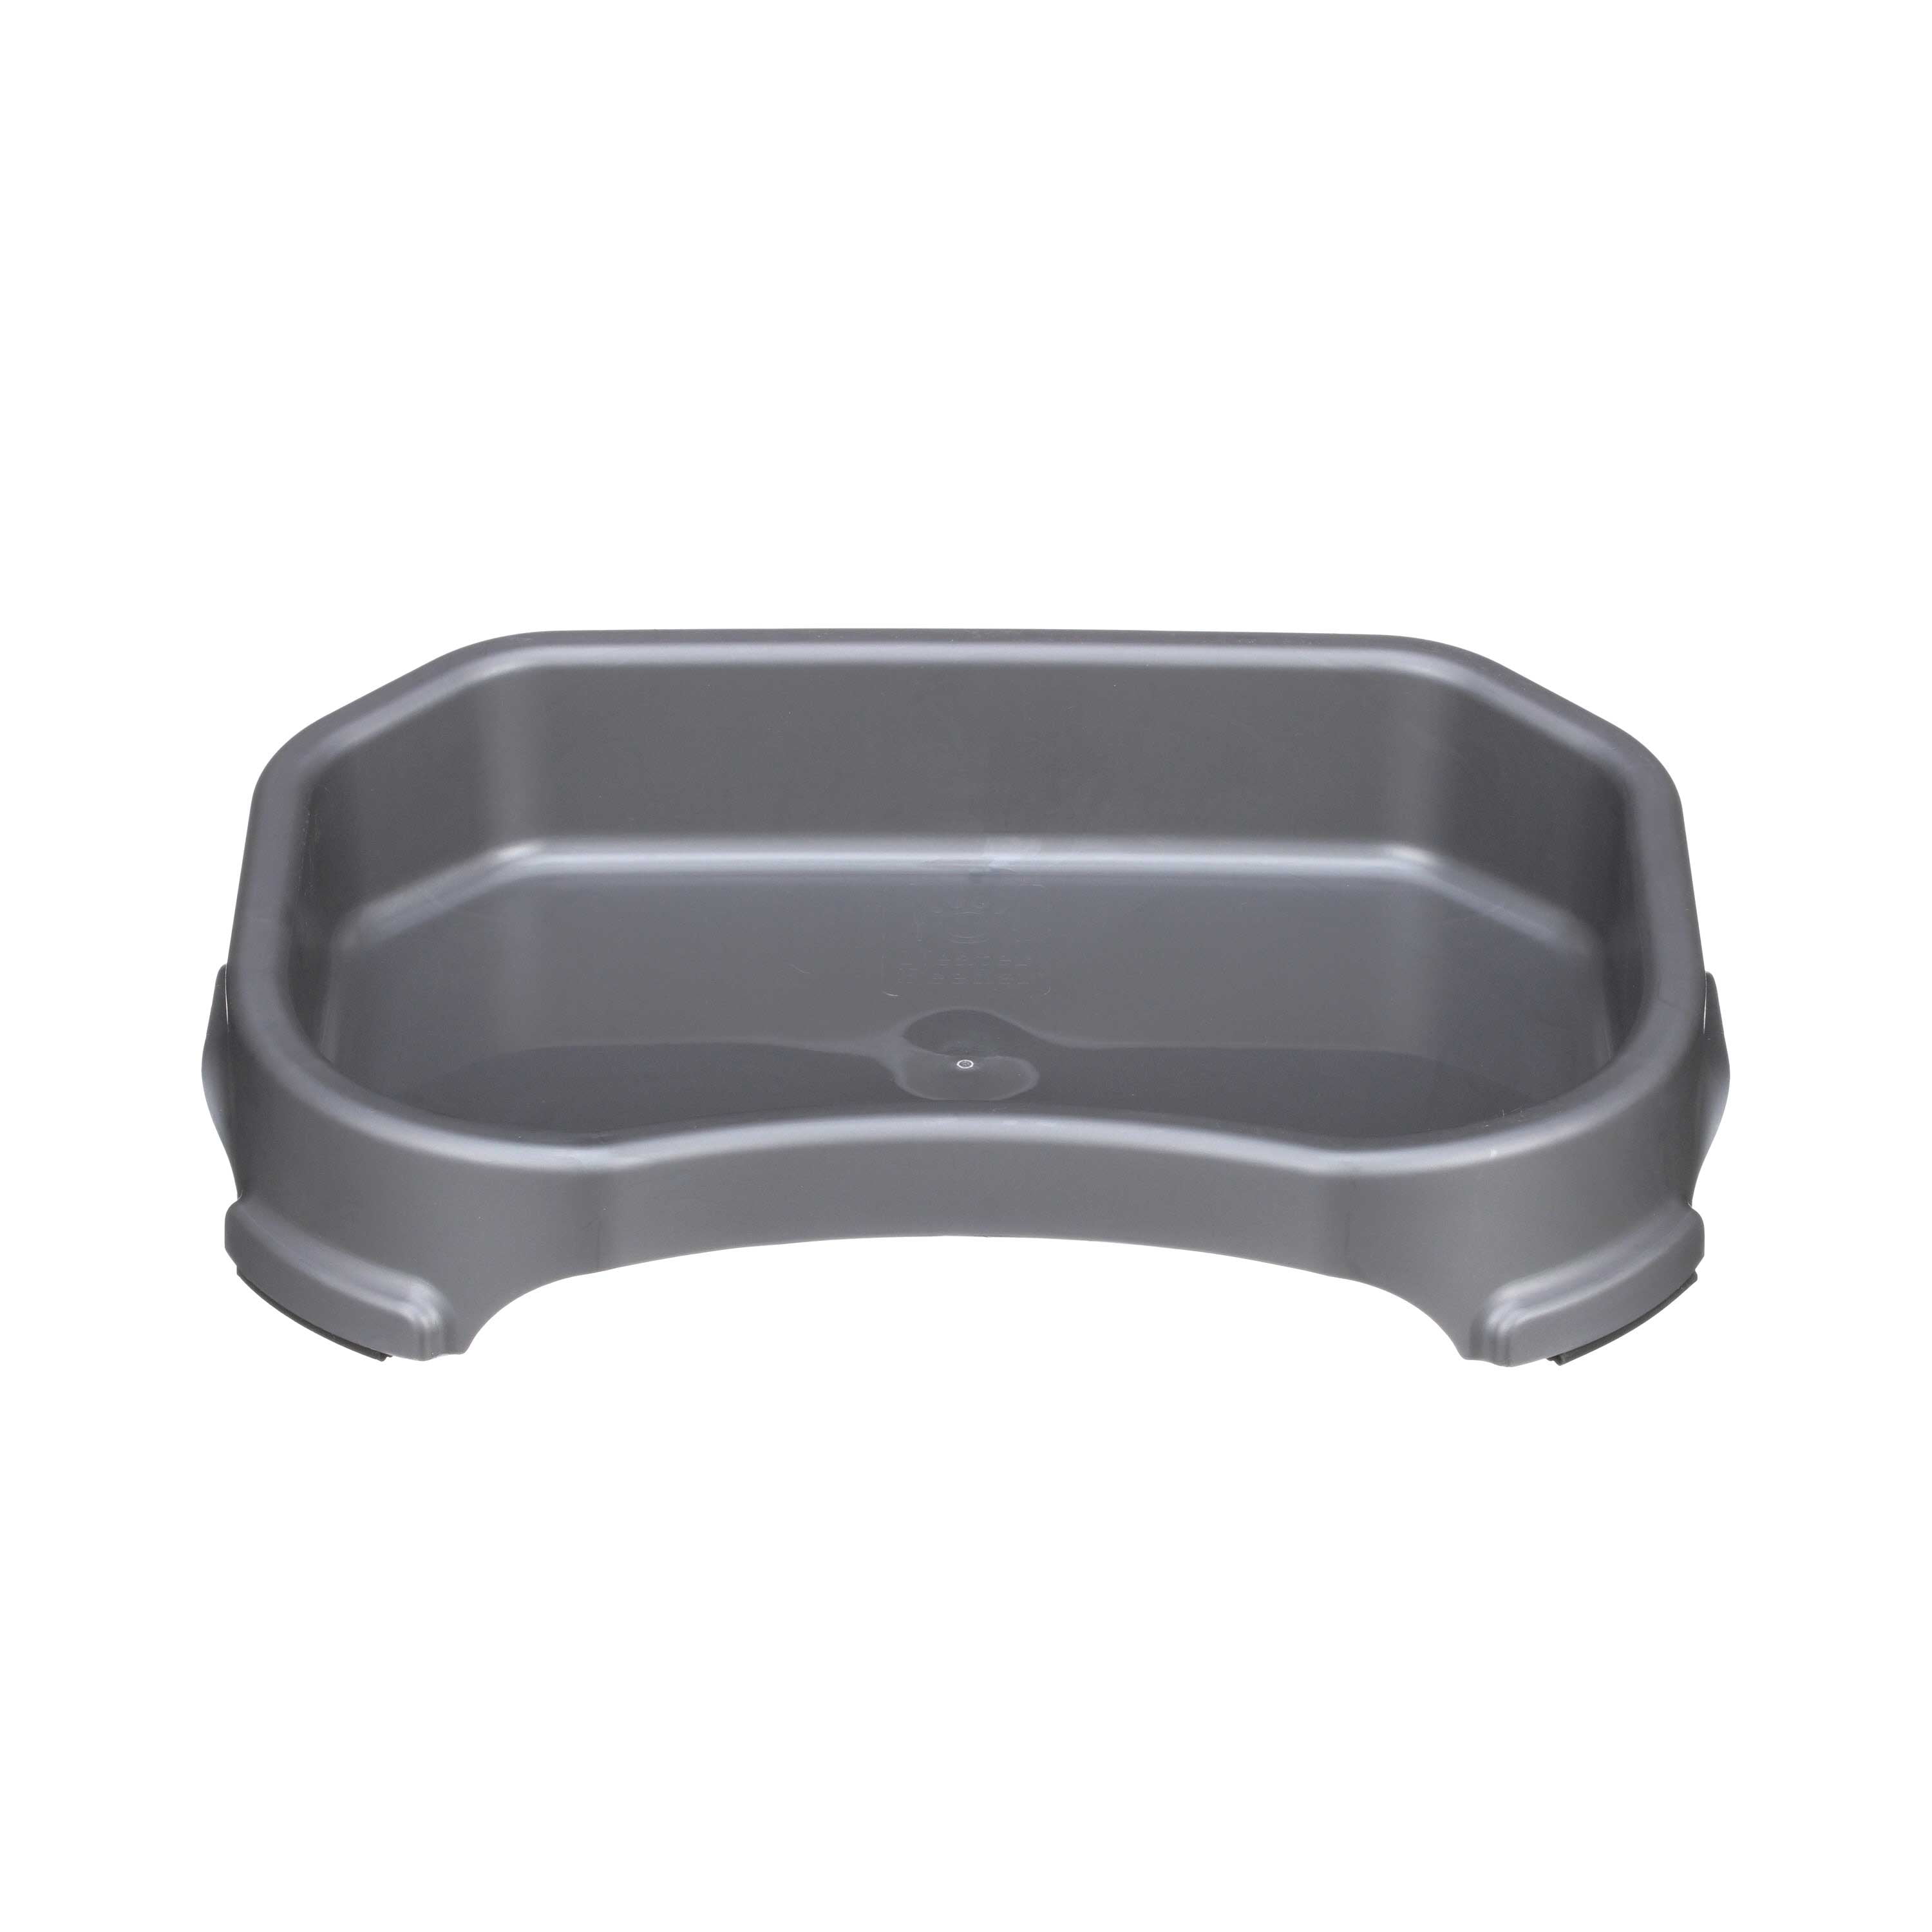 Big Bowl - Extra Large Plastic Water Bowl for Dogs, 1.25 Gallon/ 160 Oz.  Capacit